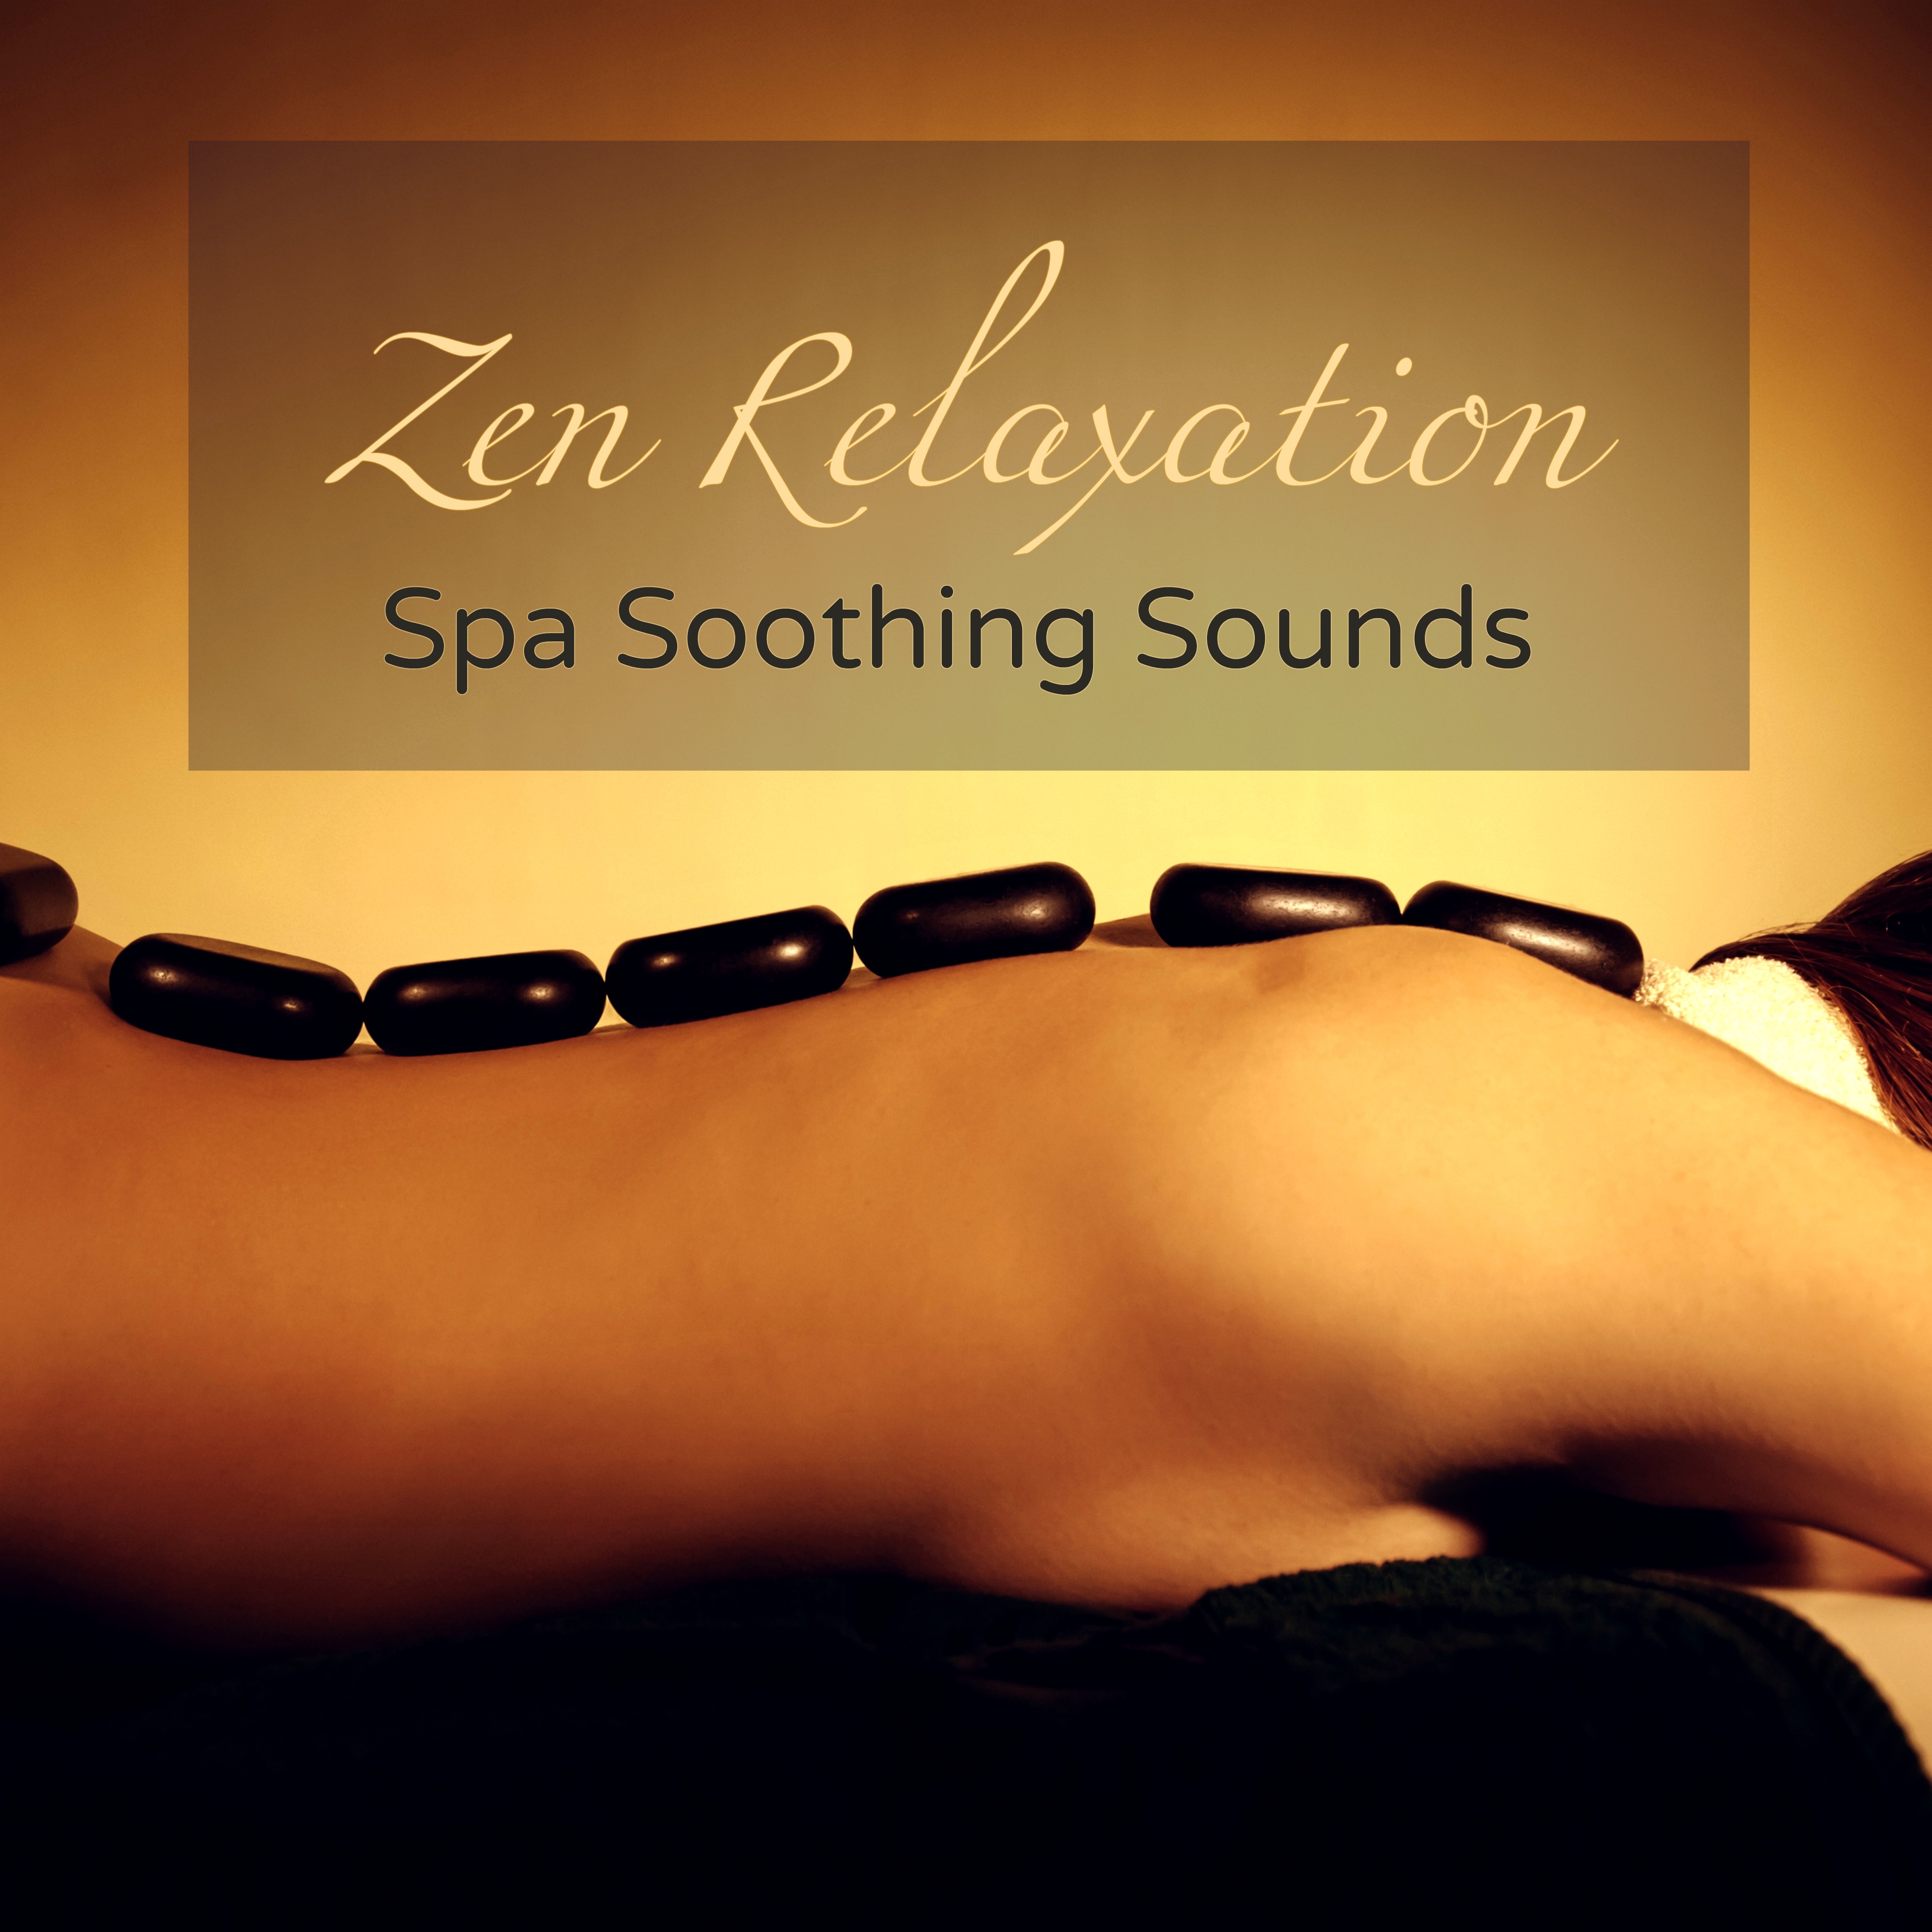 Zen Relaxation  Spa Soothing Sounds